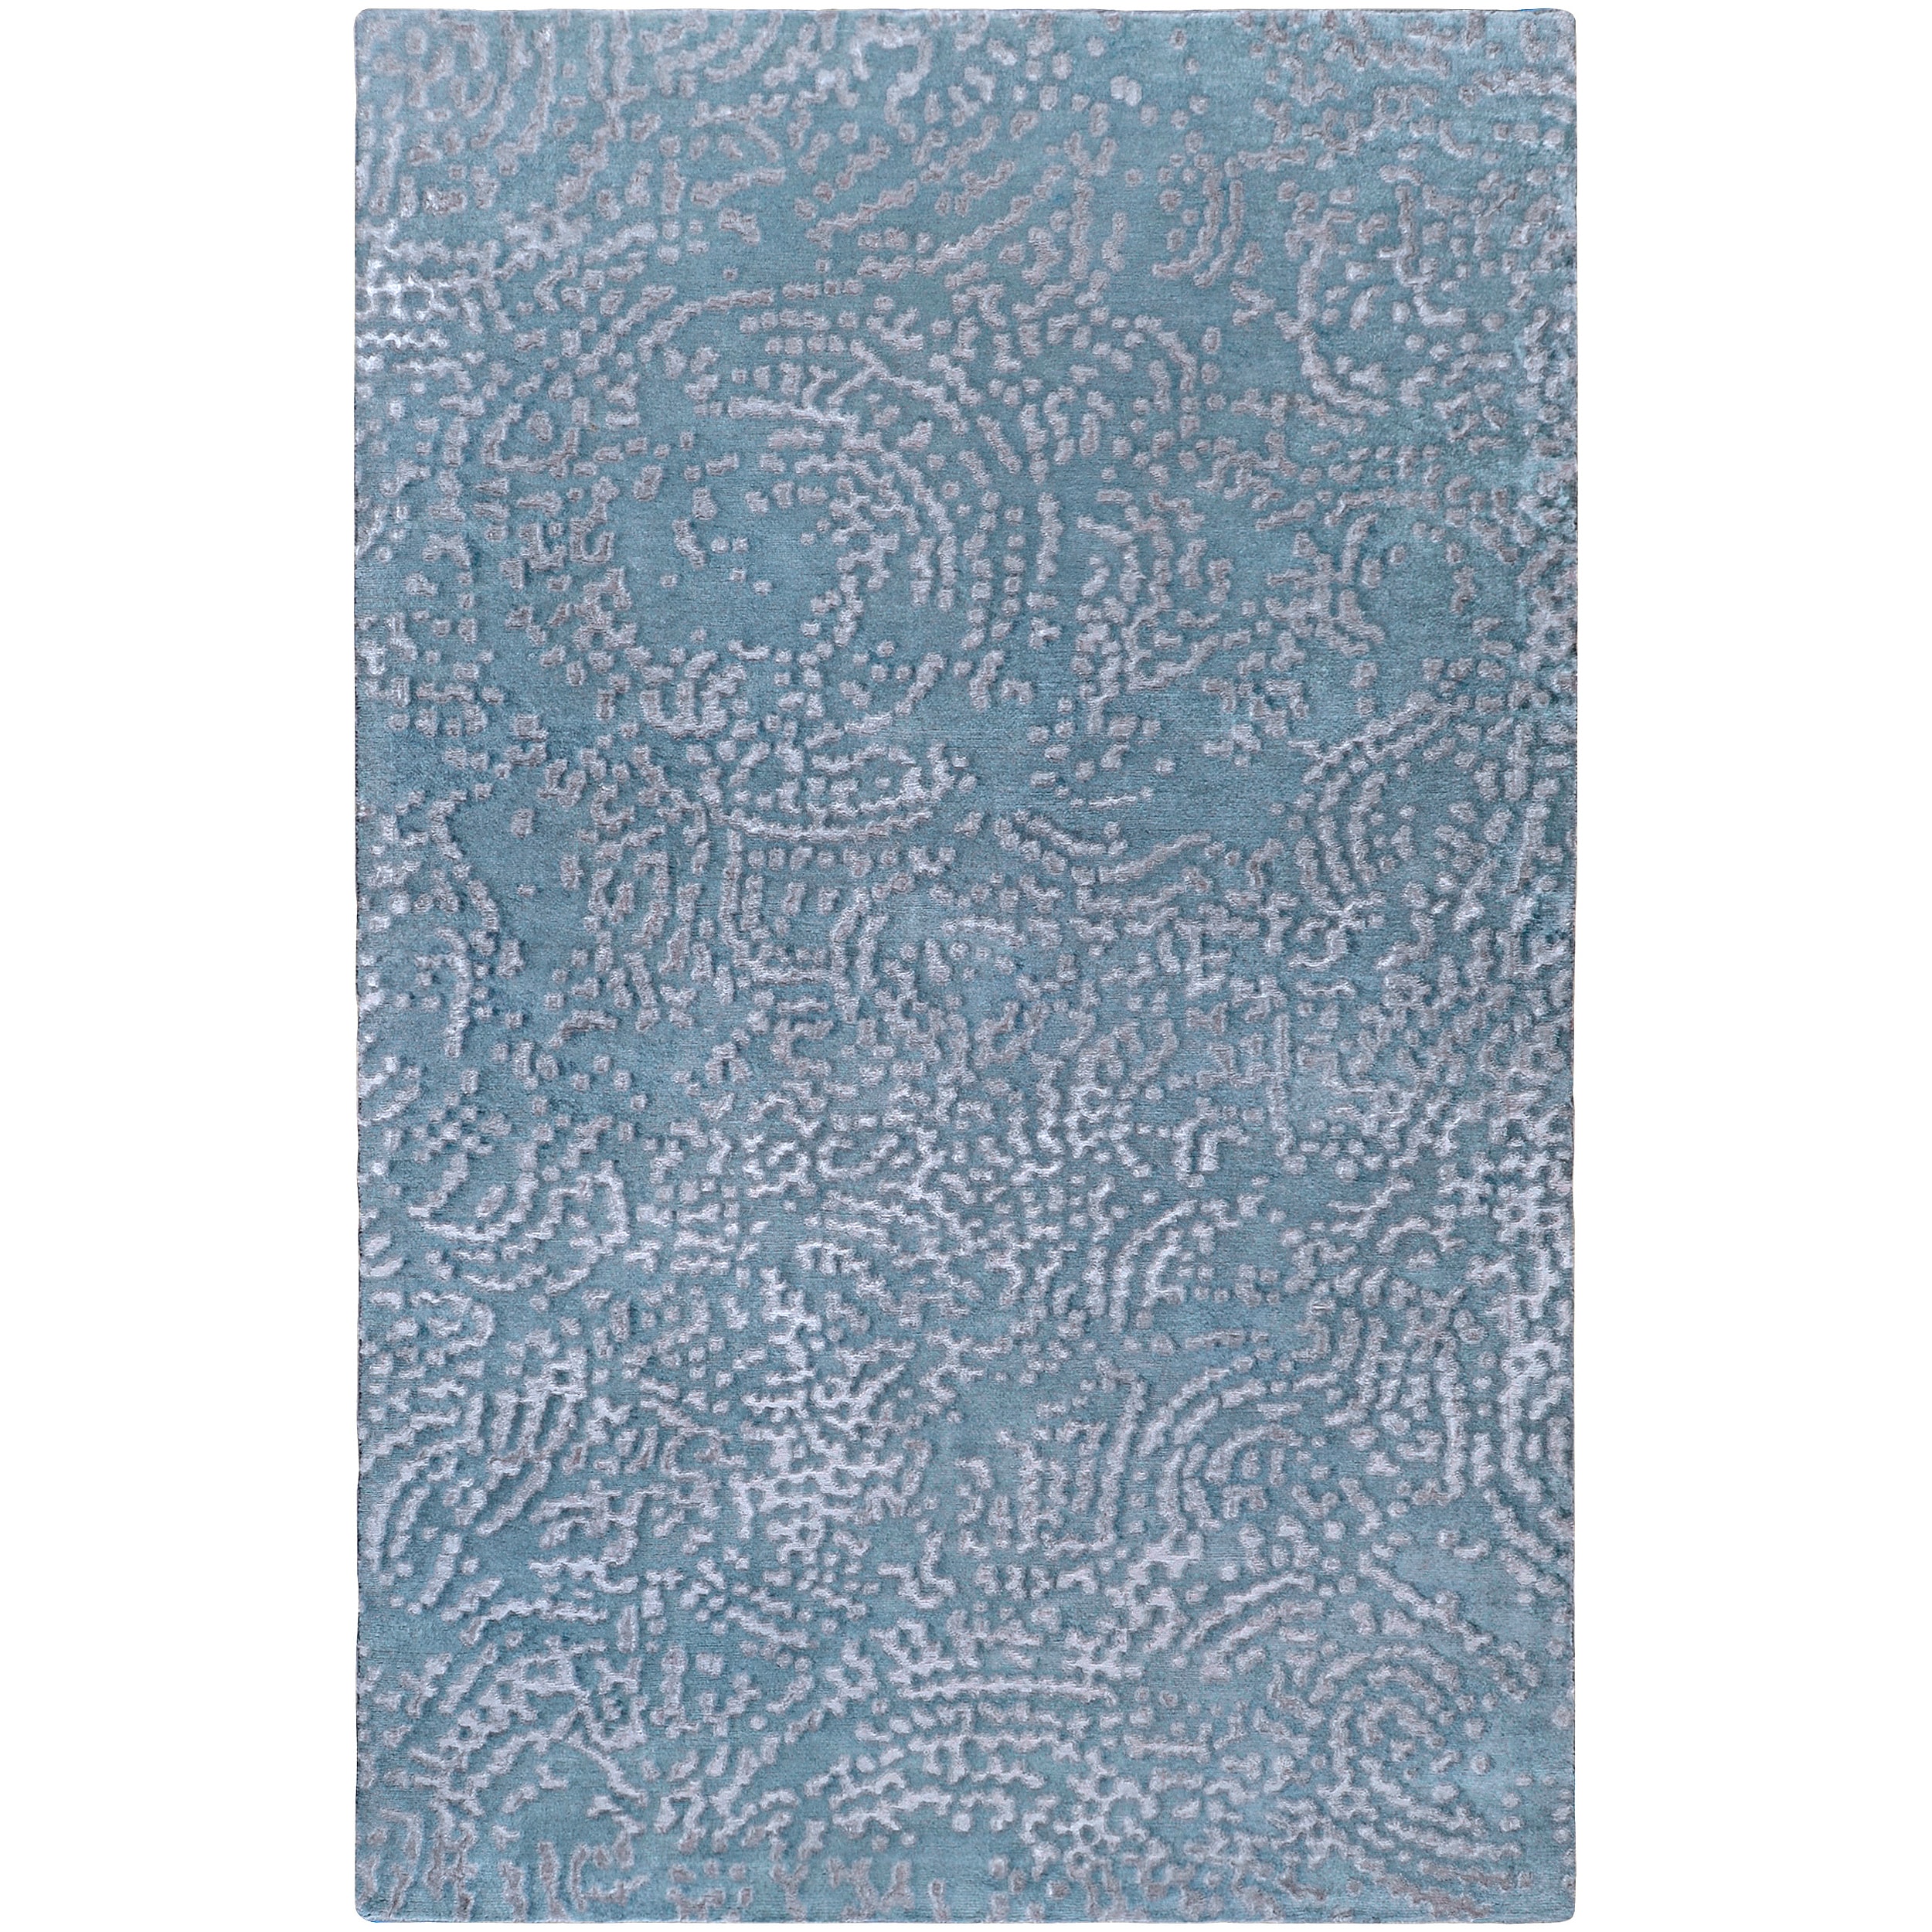 Julie Cohn Hand Knotted Pale Blue Dale Abstract Design Wool Rug (4 X 6)